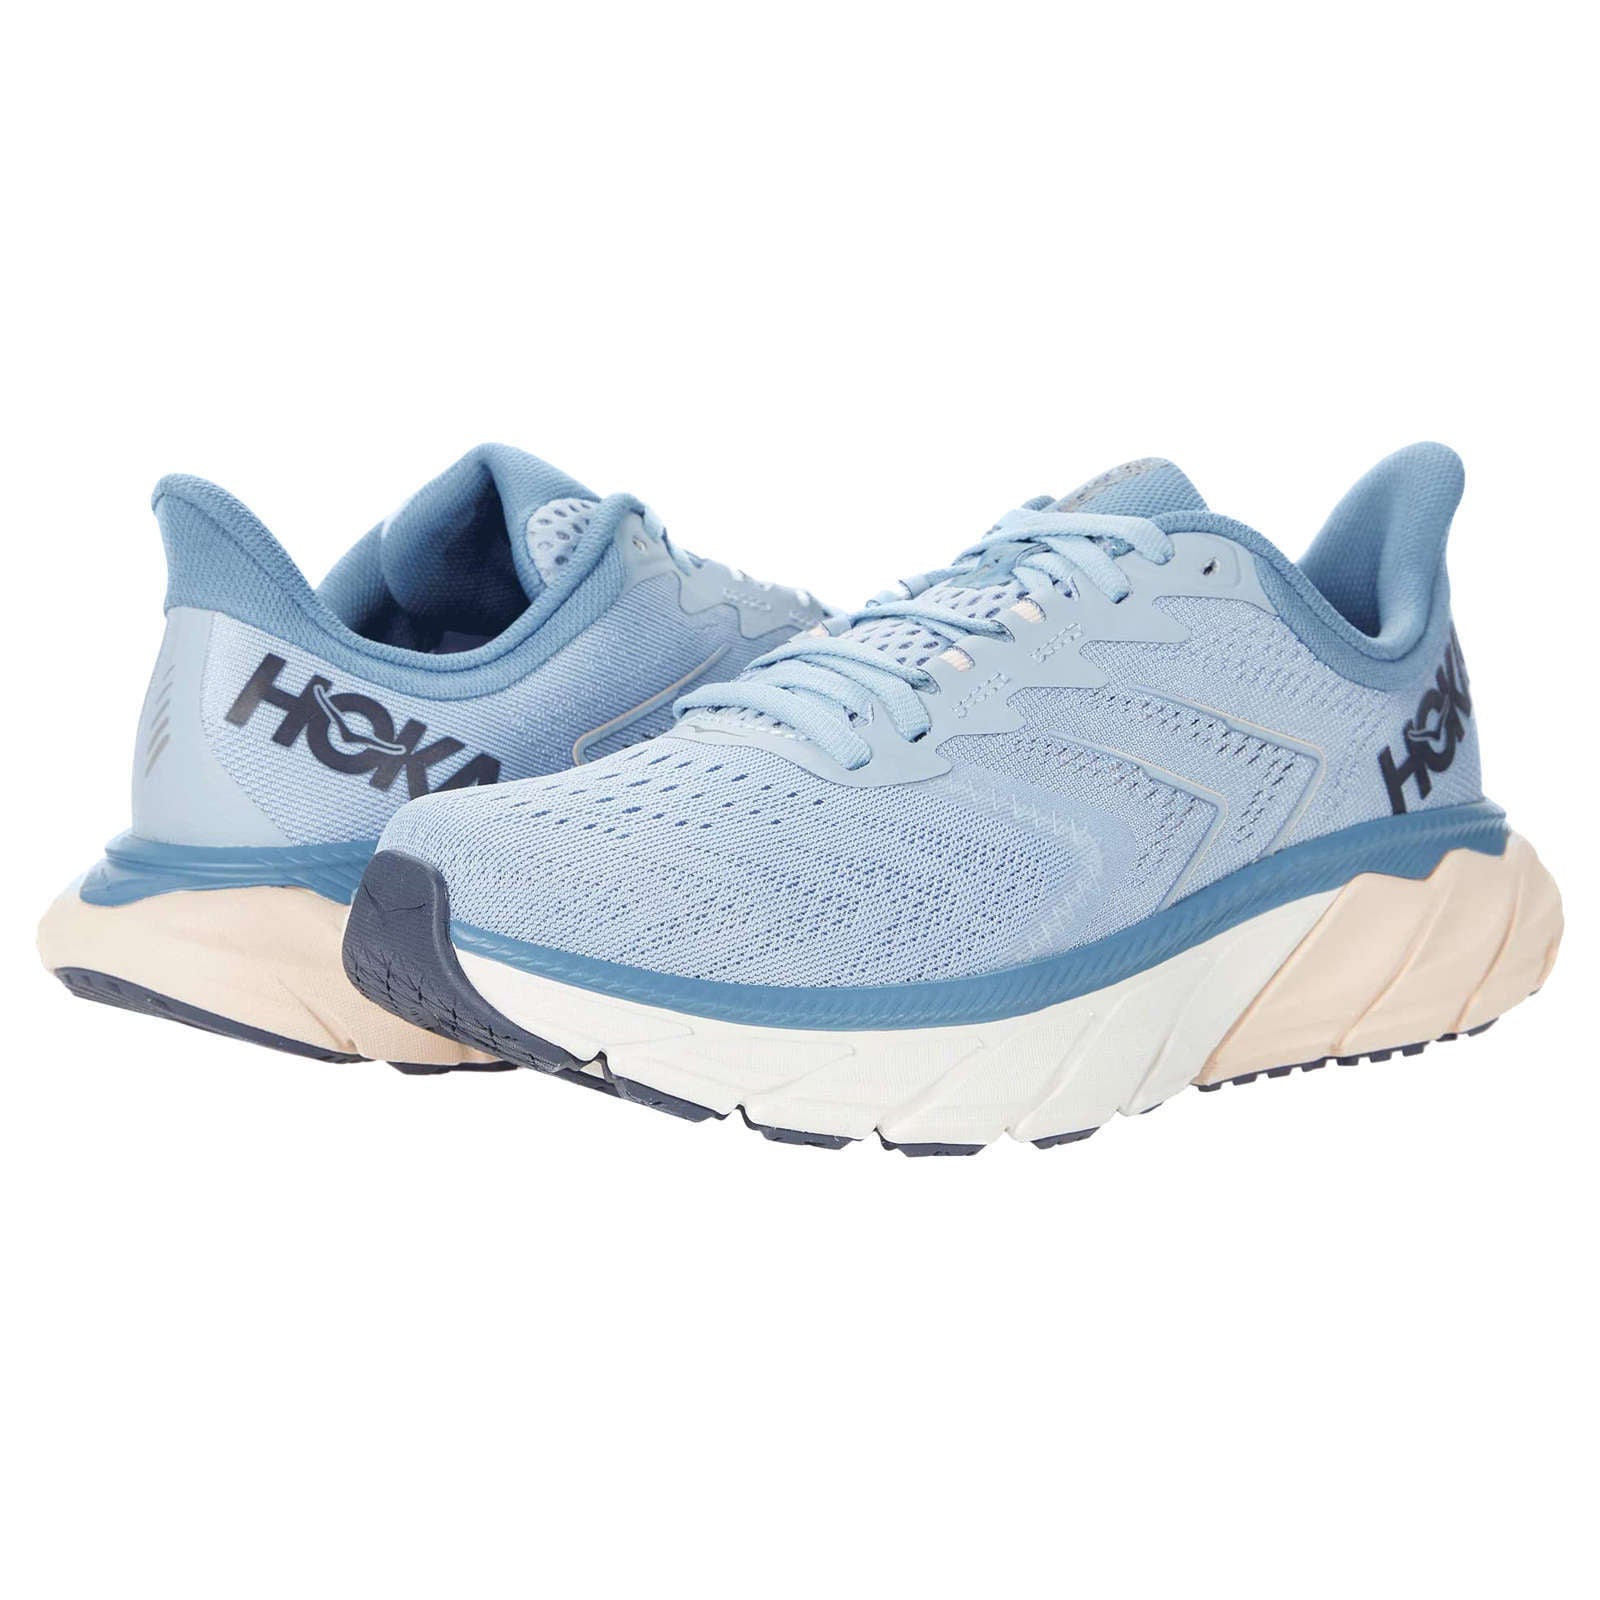 Hoka One One Arahi 5 Synthetic Textile Women's Low-Top Road Running Trainers#color_blue fog provincial blue